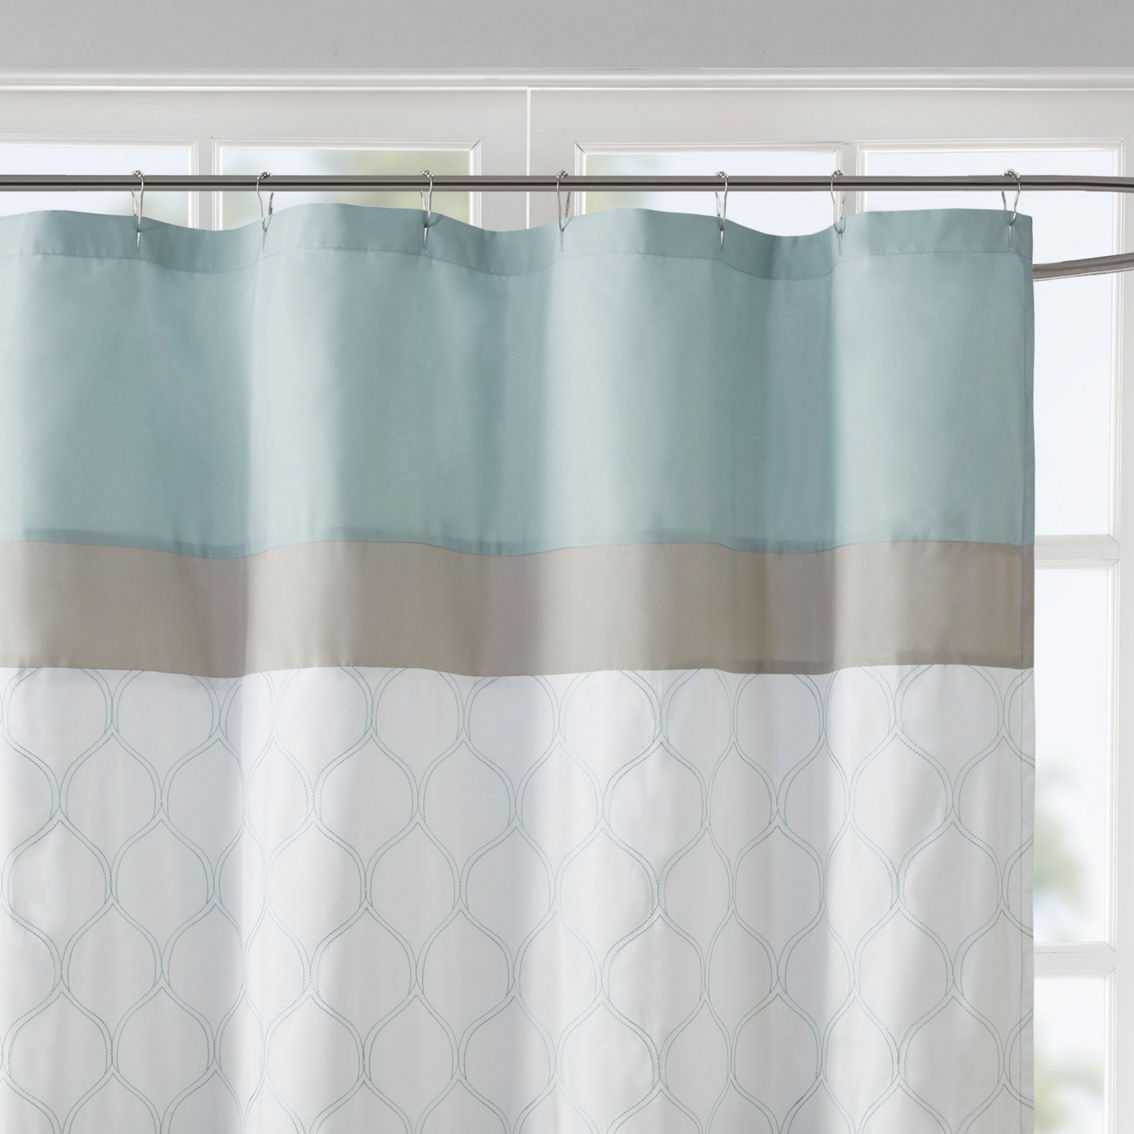 510 Design Josefina Printed and Embroidered Shower Curtain - Image 3 of 4